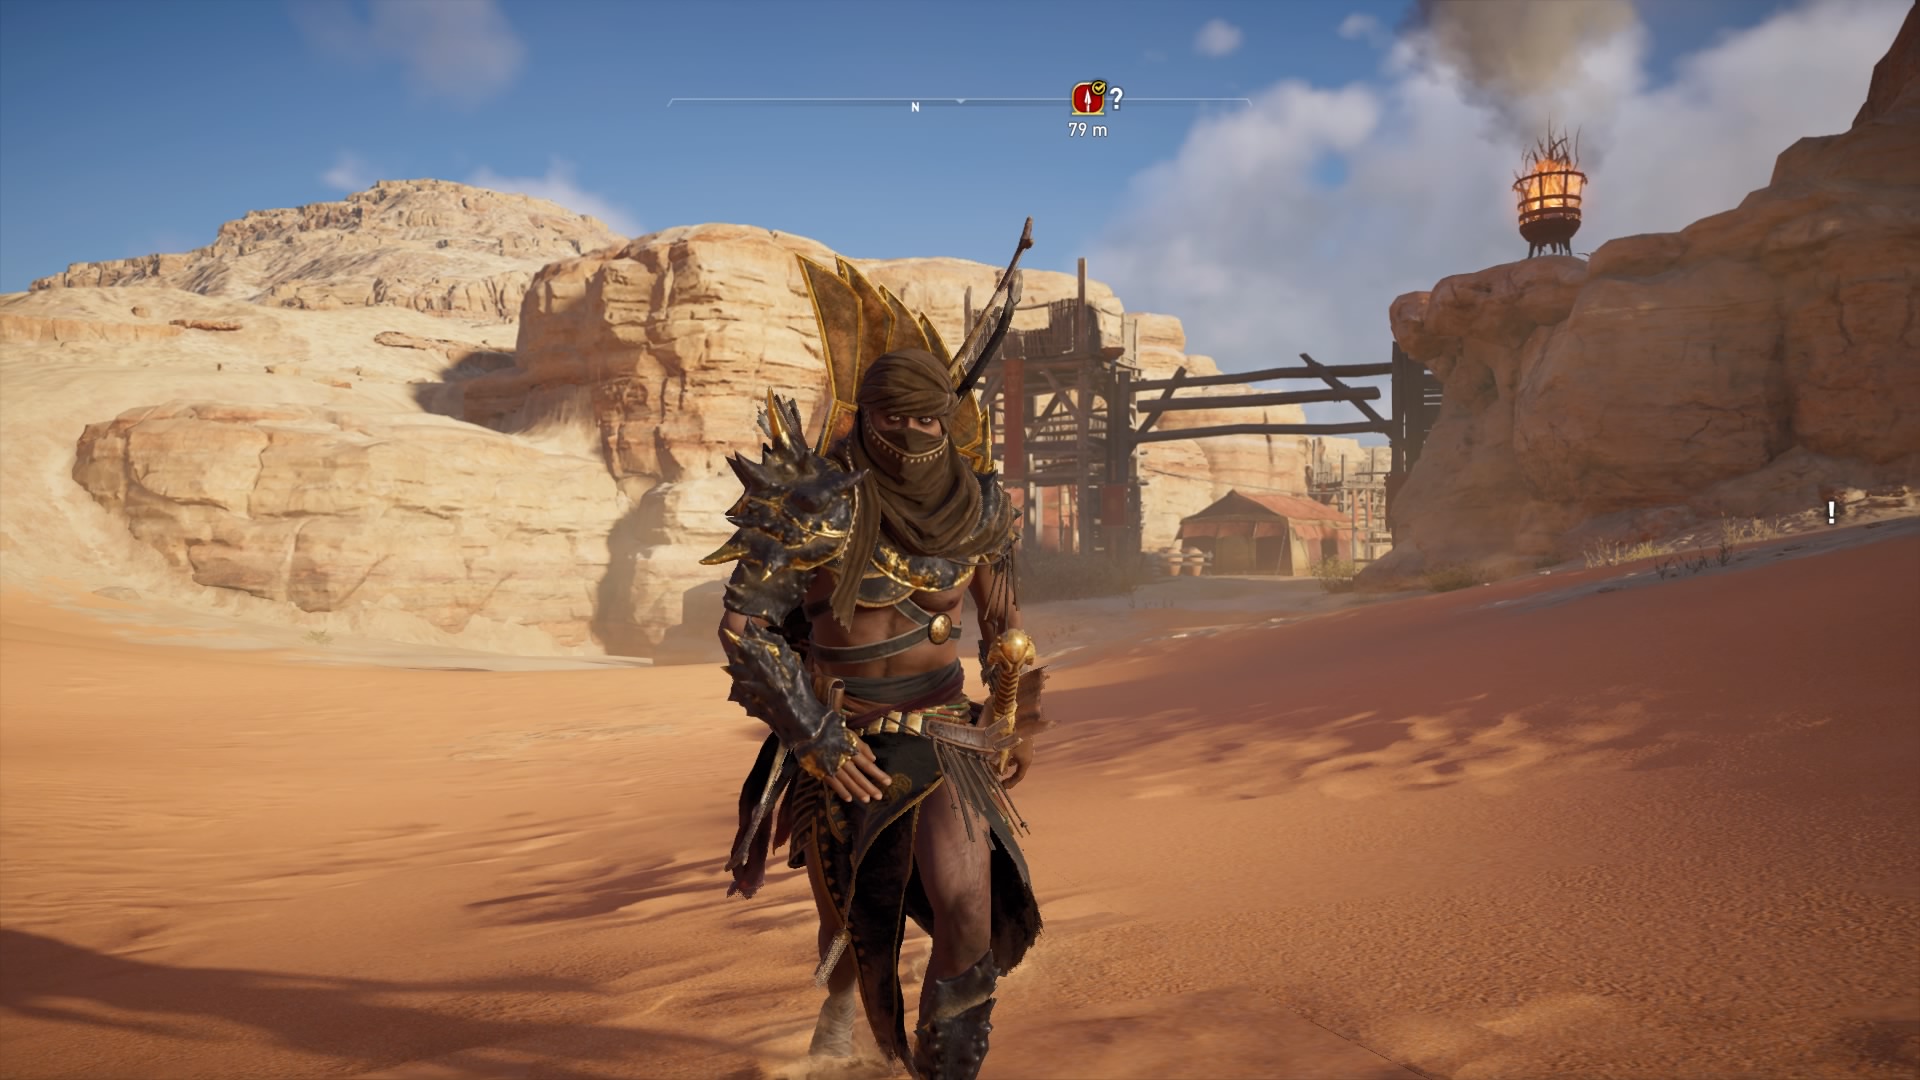 Assassin's Creed Origins® - The Curse Of the Pharaohs